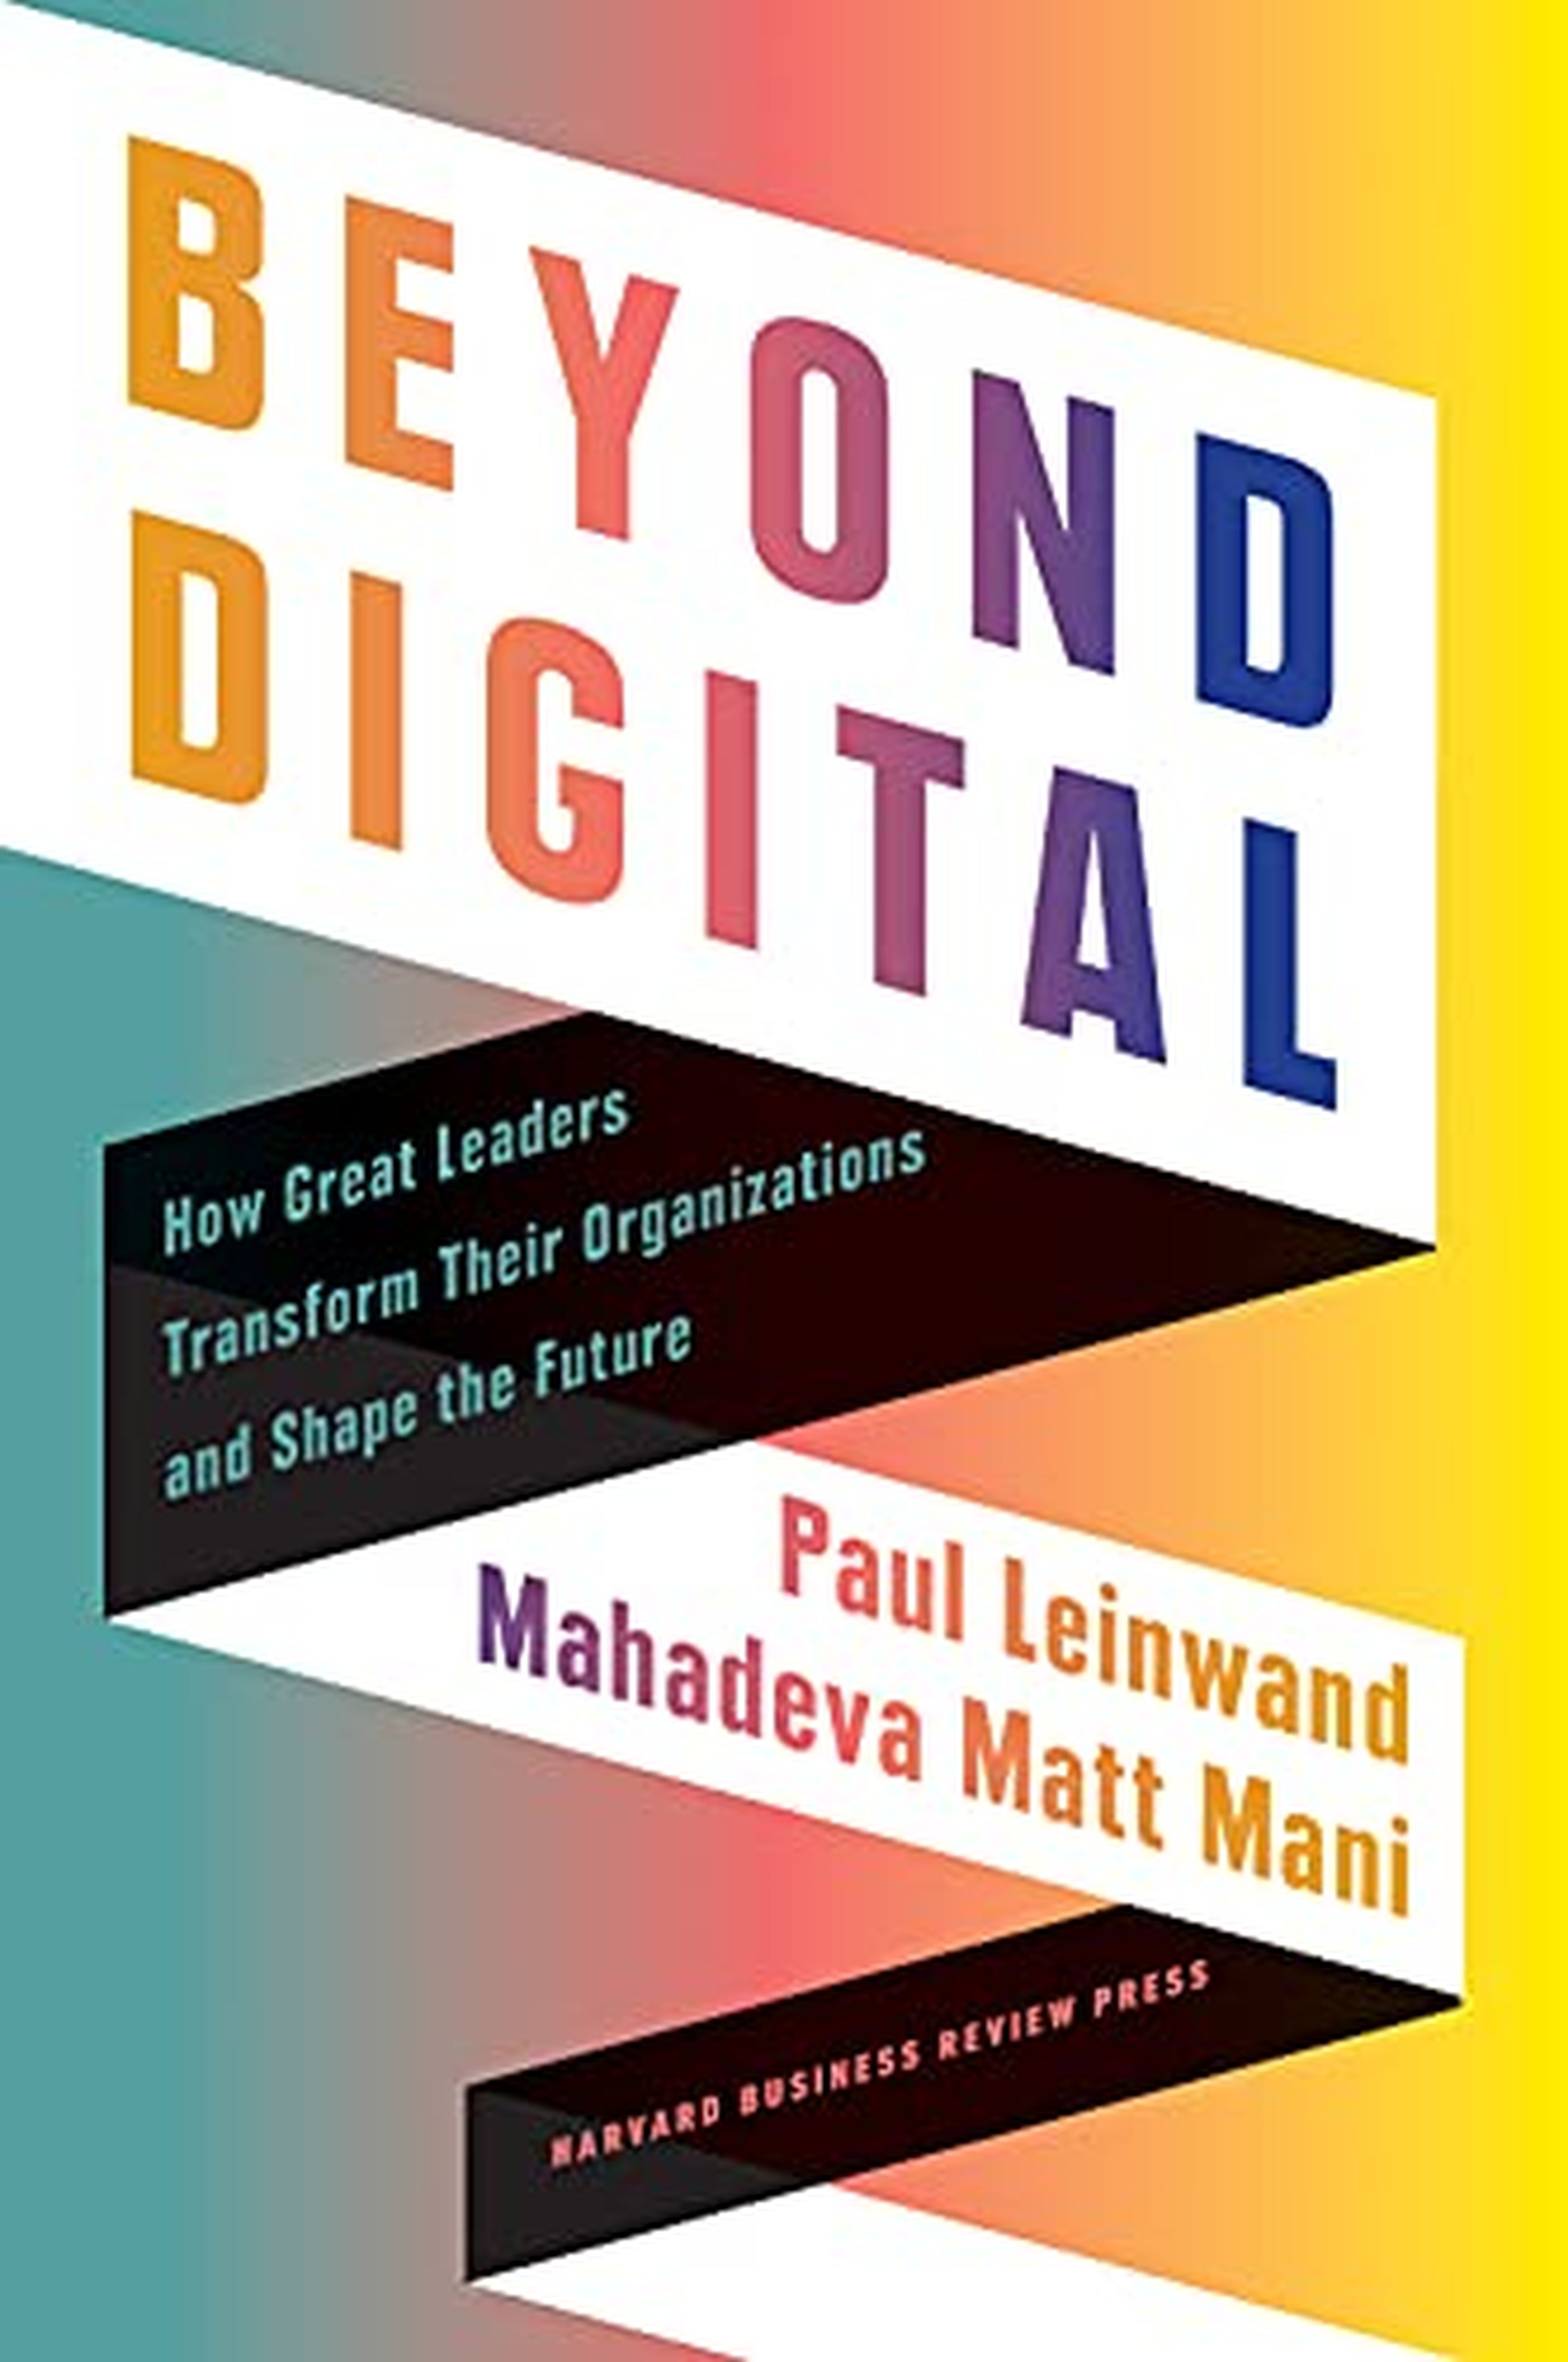 'Beyond Digital: How Great Leaders Transform Their Organizations and Shape the Future'